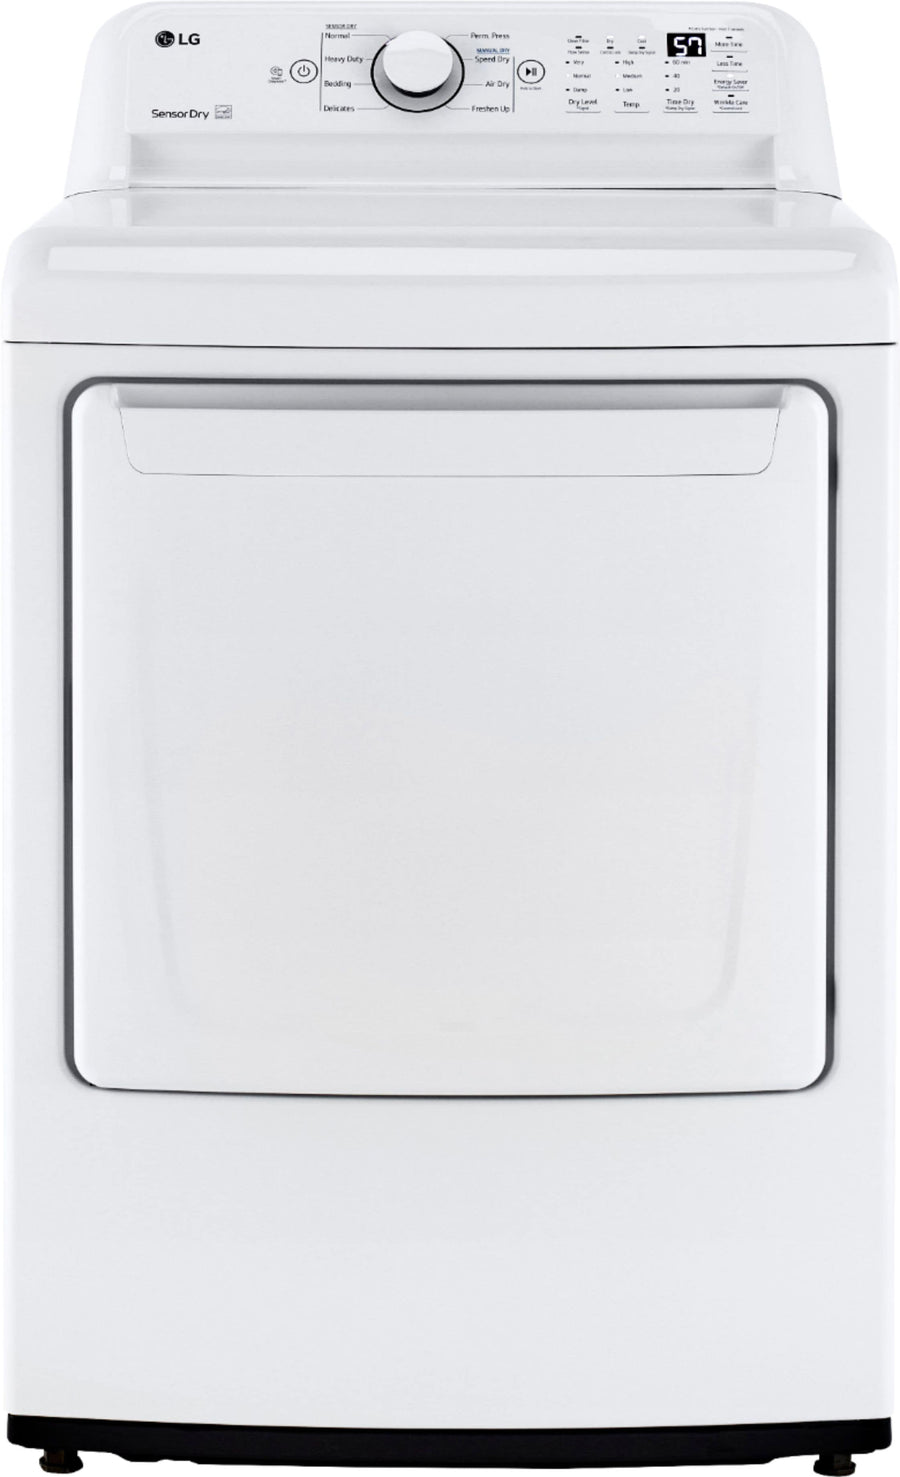 LG - 7.3 cu ft Electric Dryer with Sensor Dry - White_0